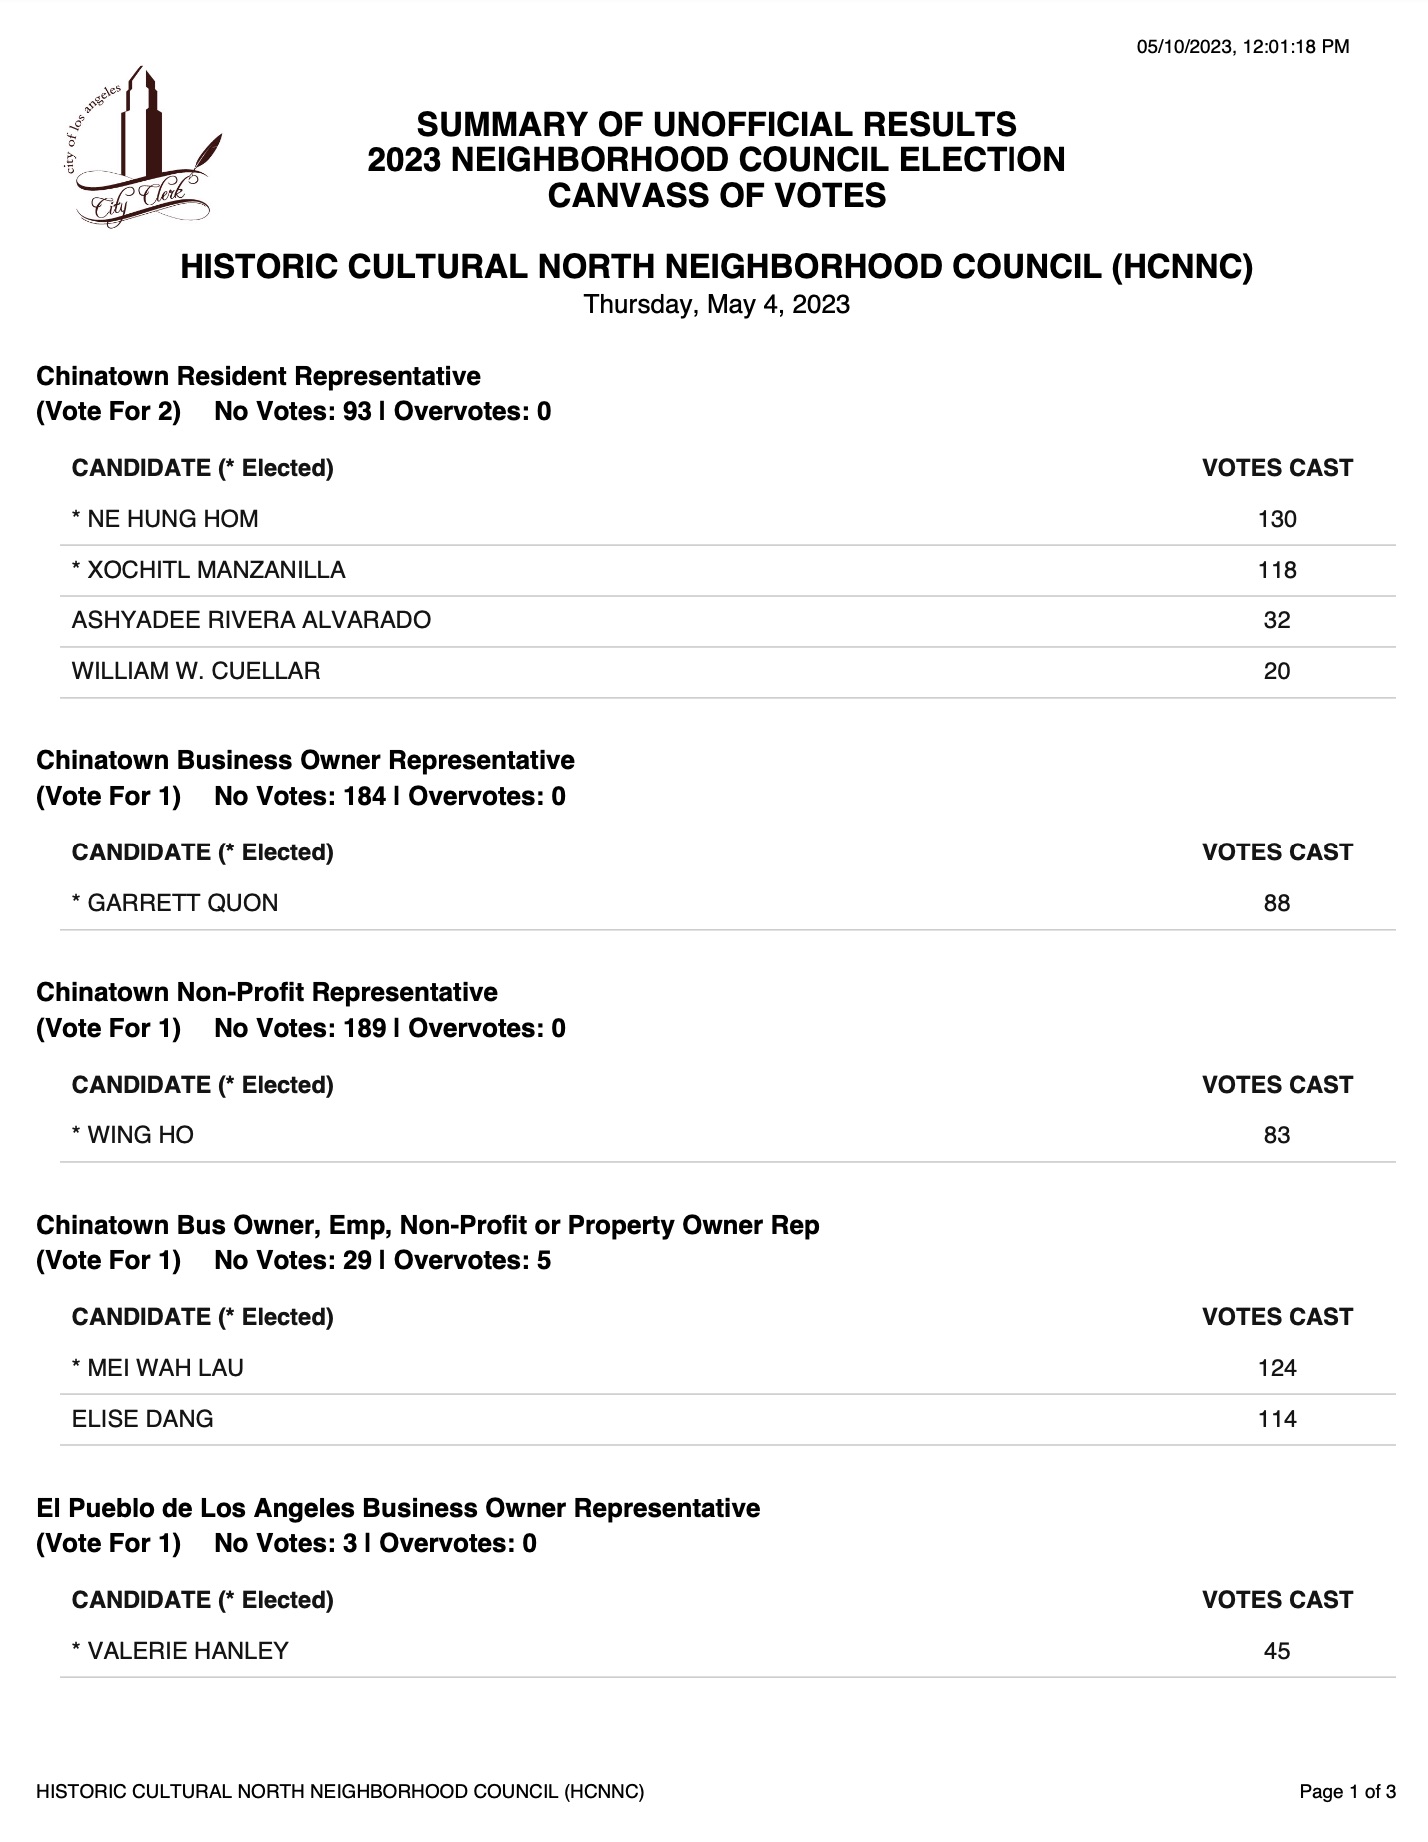 HCNNC May 4, 2023 Election - Unofficial Results (PDF file)